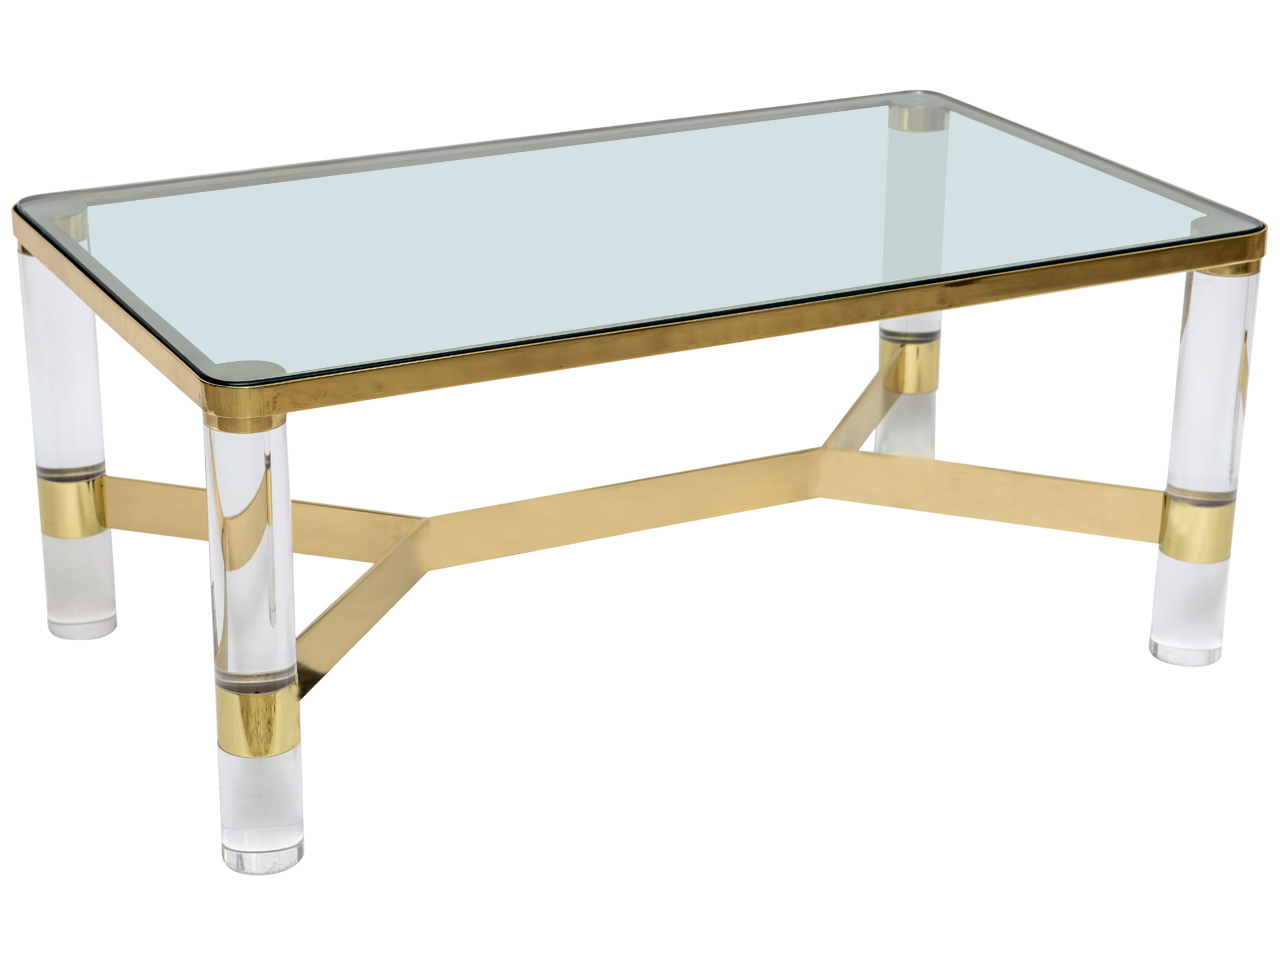 Karl Springer lucite and brass coffee table 1st dibs